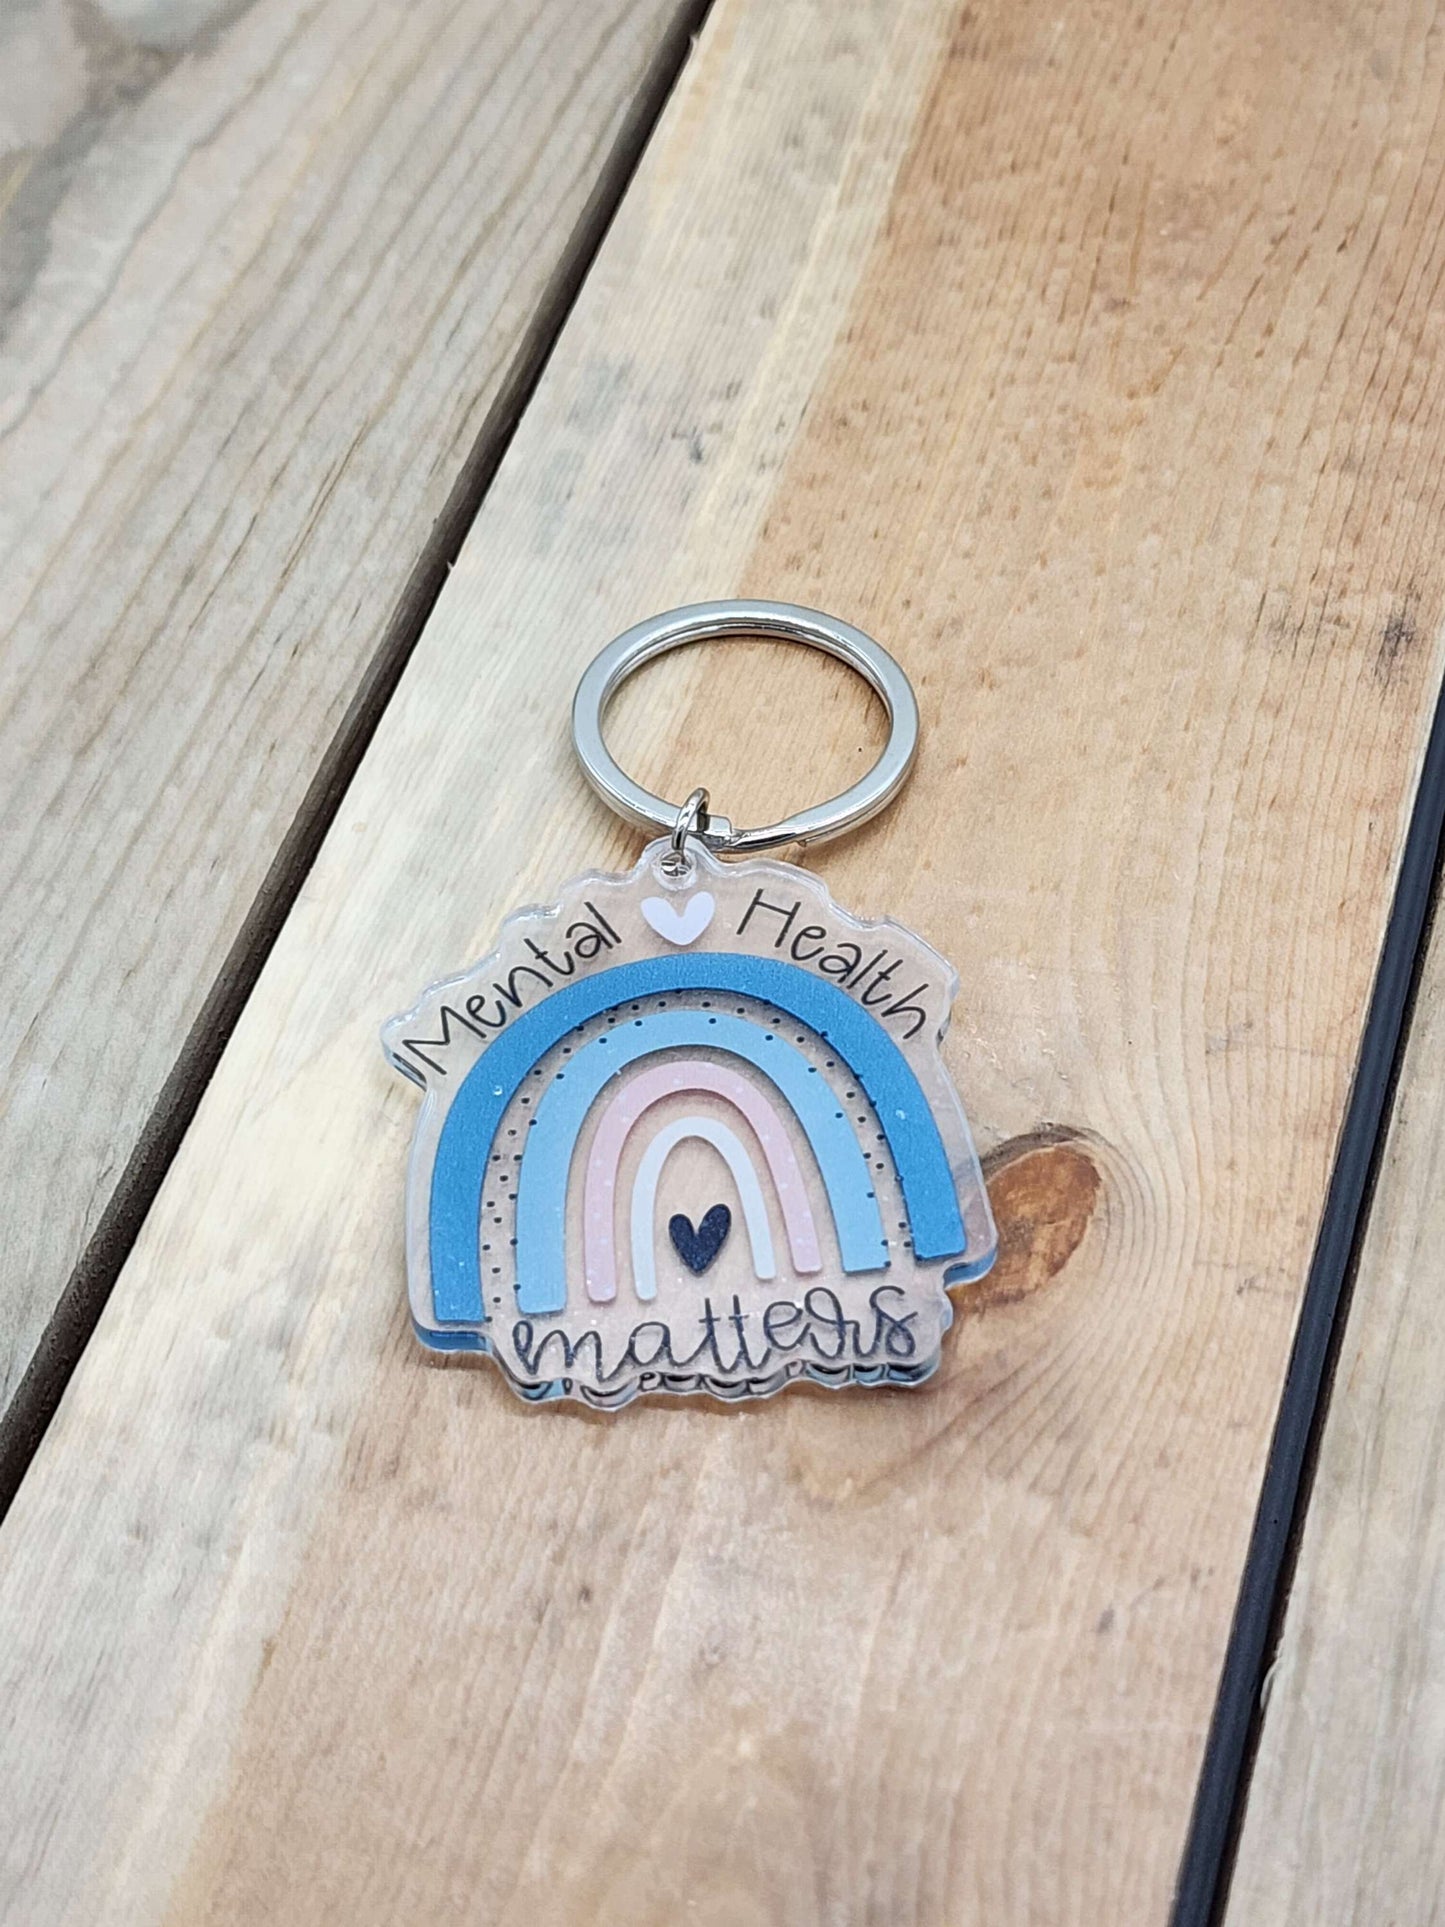 Mental Health Matters Keychain to support NAMI